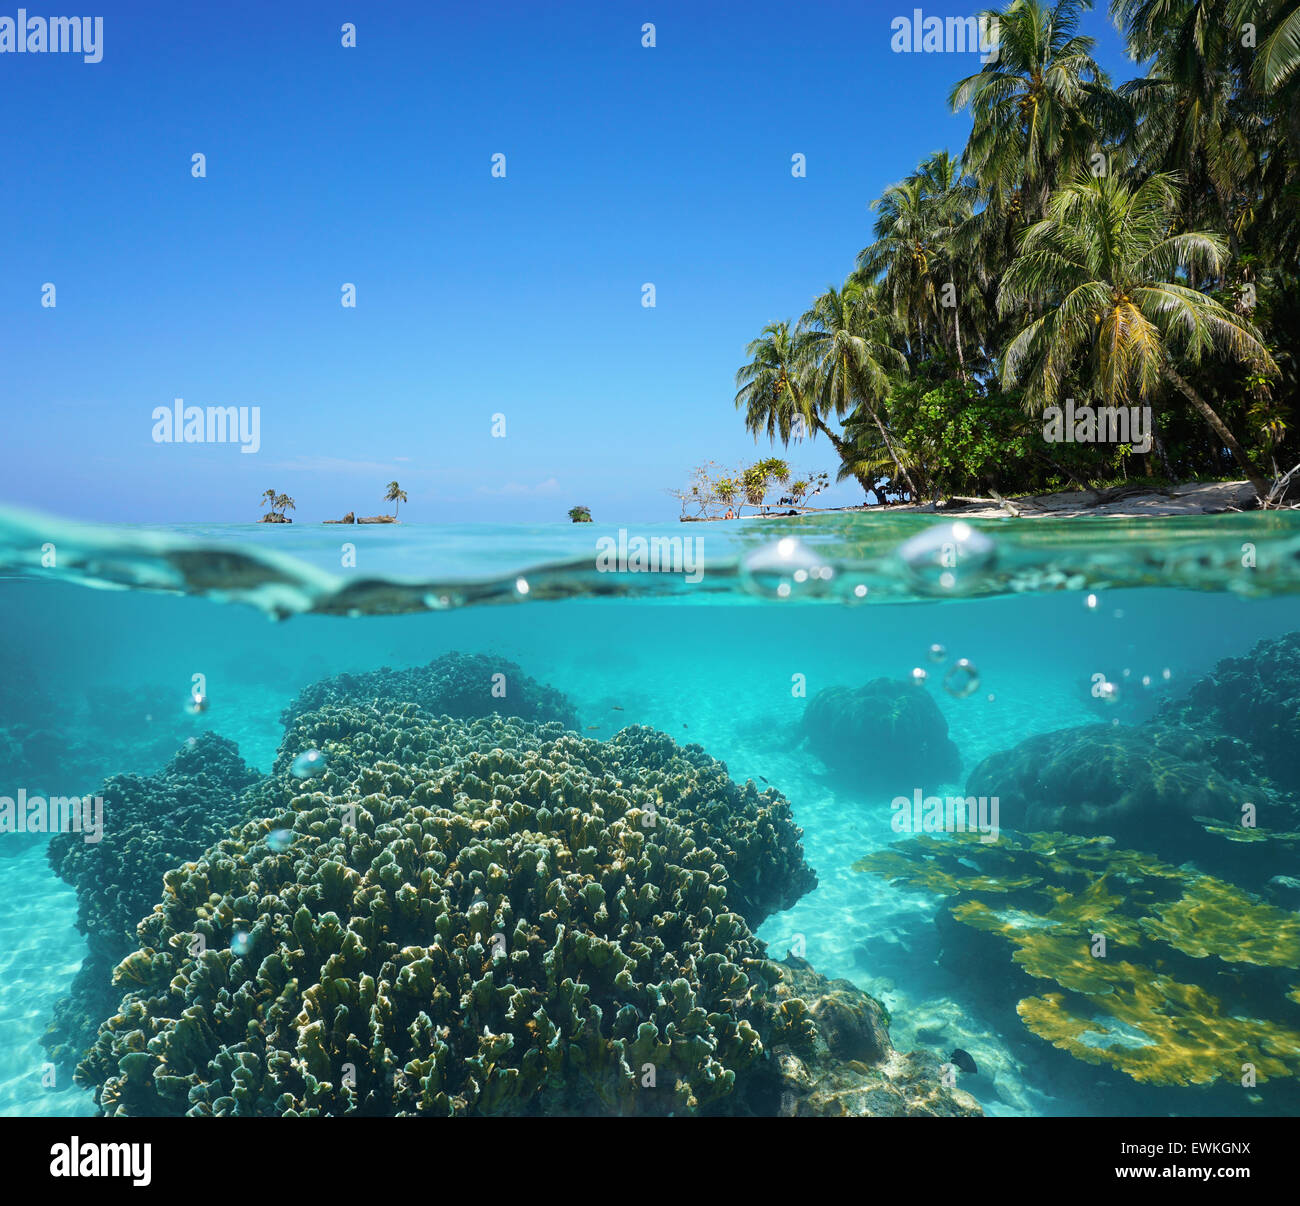 Split image over and under sea surface with coconut trees on tropical shore above waterline and corals underwater, Caribbean Stock Photo